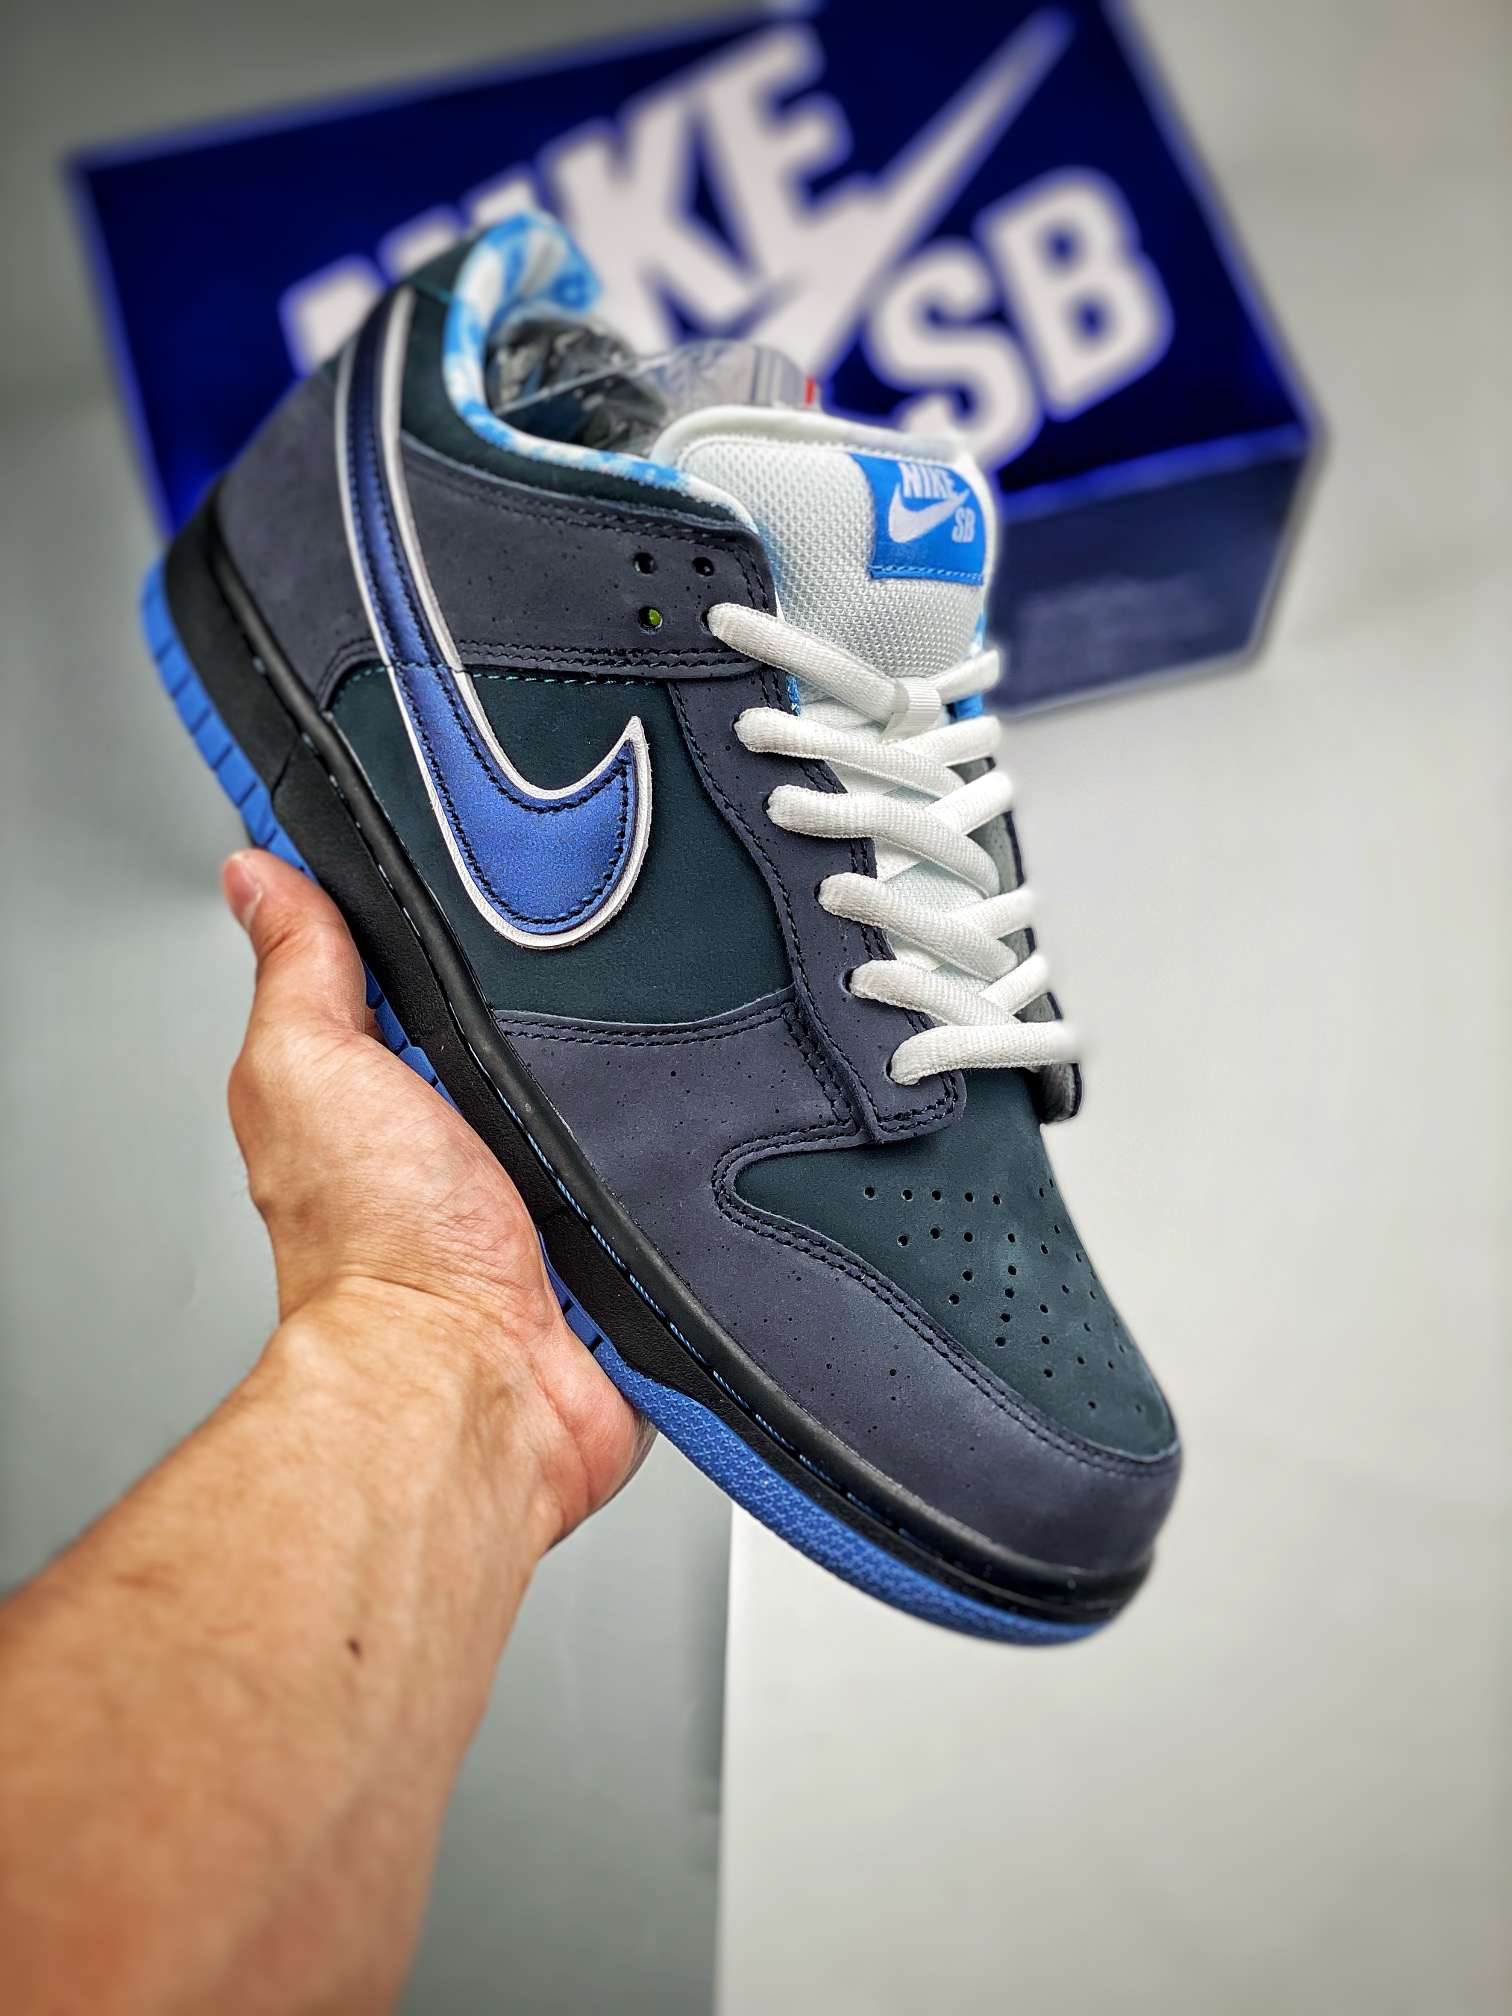 Concepts x Nike SB Dunk Low "Blue Lobster" 313170-342 Shoes